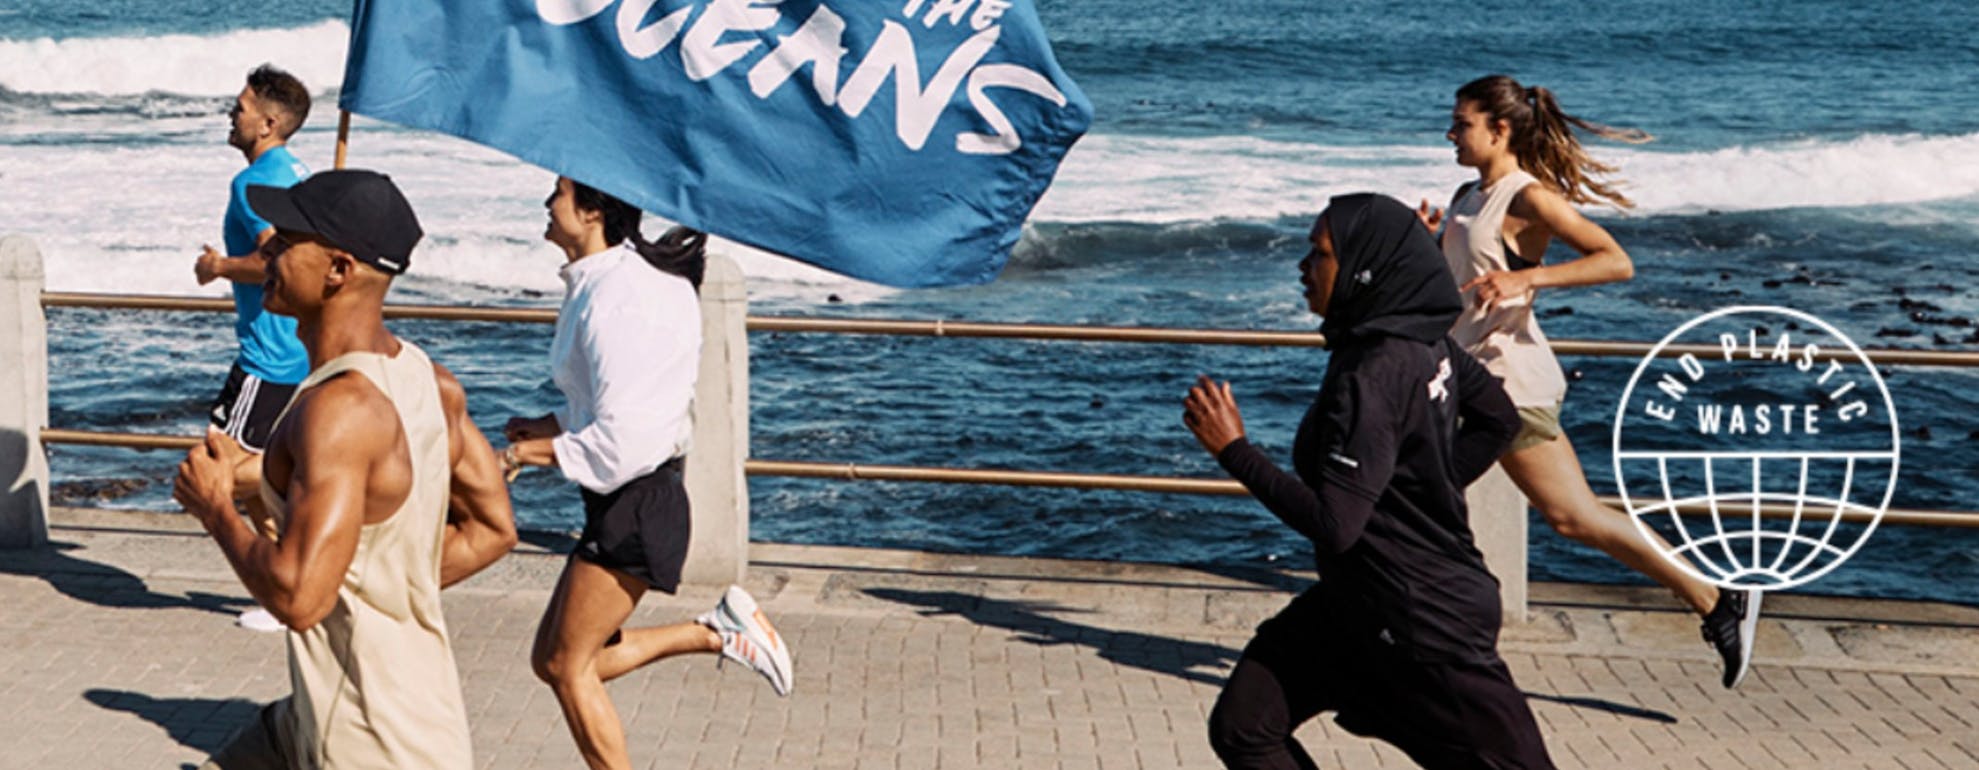 adidas-run-for-the-oceans-campaign